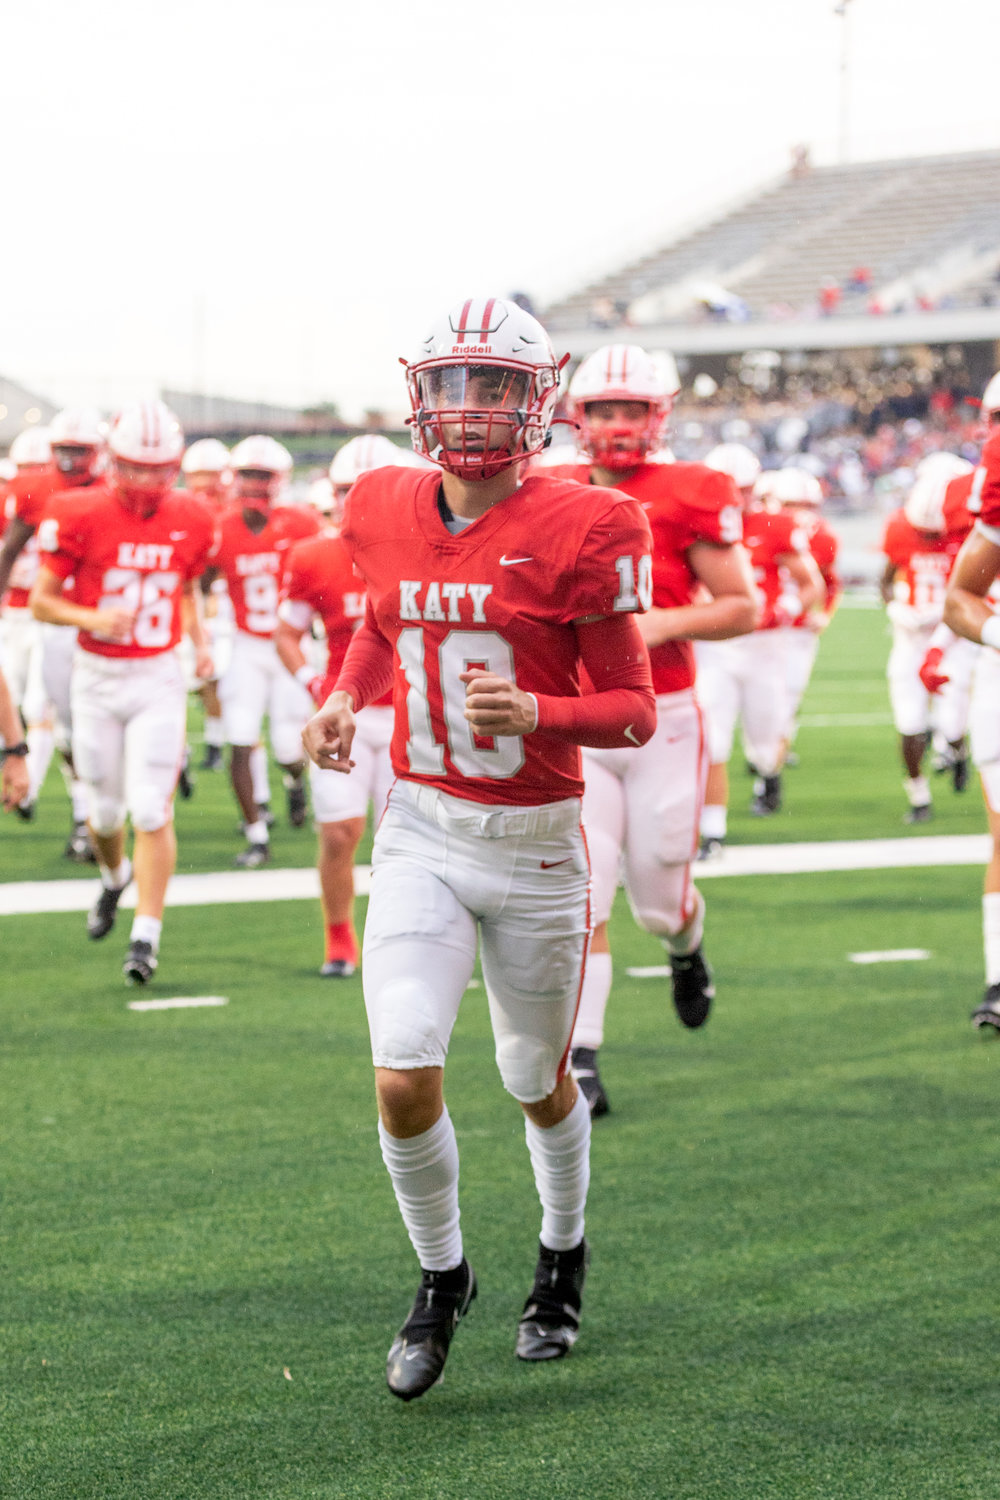 Katy’s Caleb Koger leads his team off the field before Friday’s game between Katy and Atascocita at Legacy Stadium.